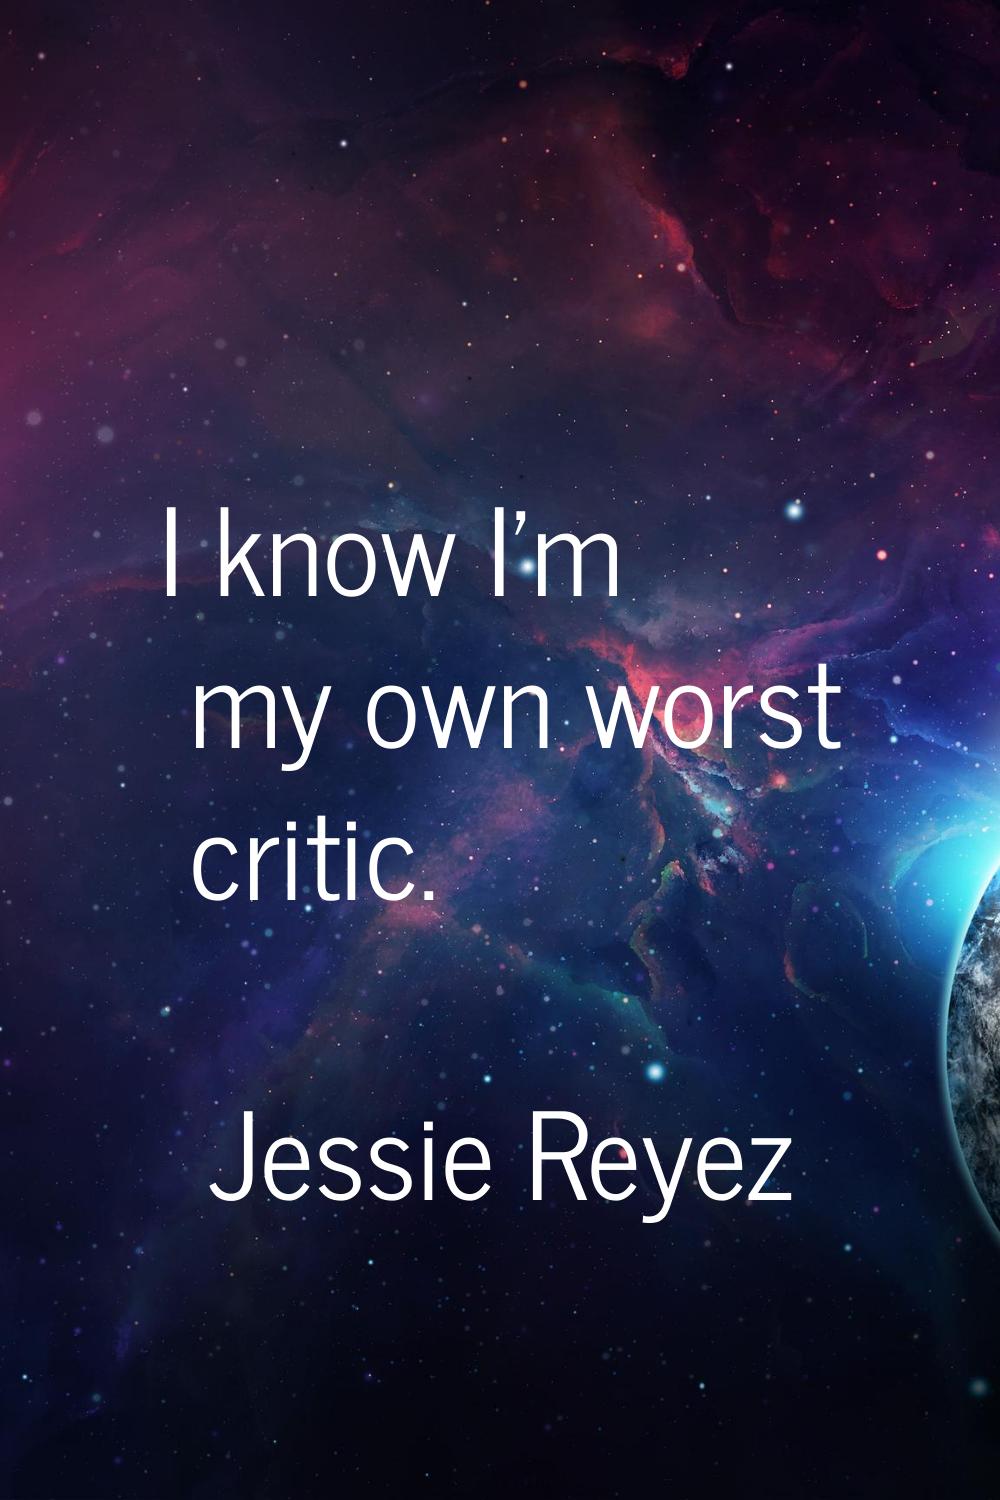 I know I'm my own worst critic.